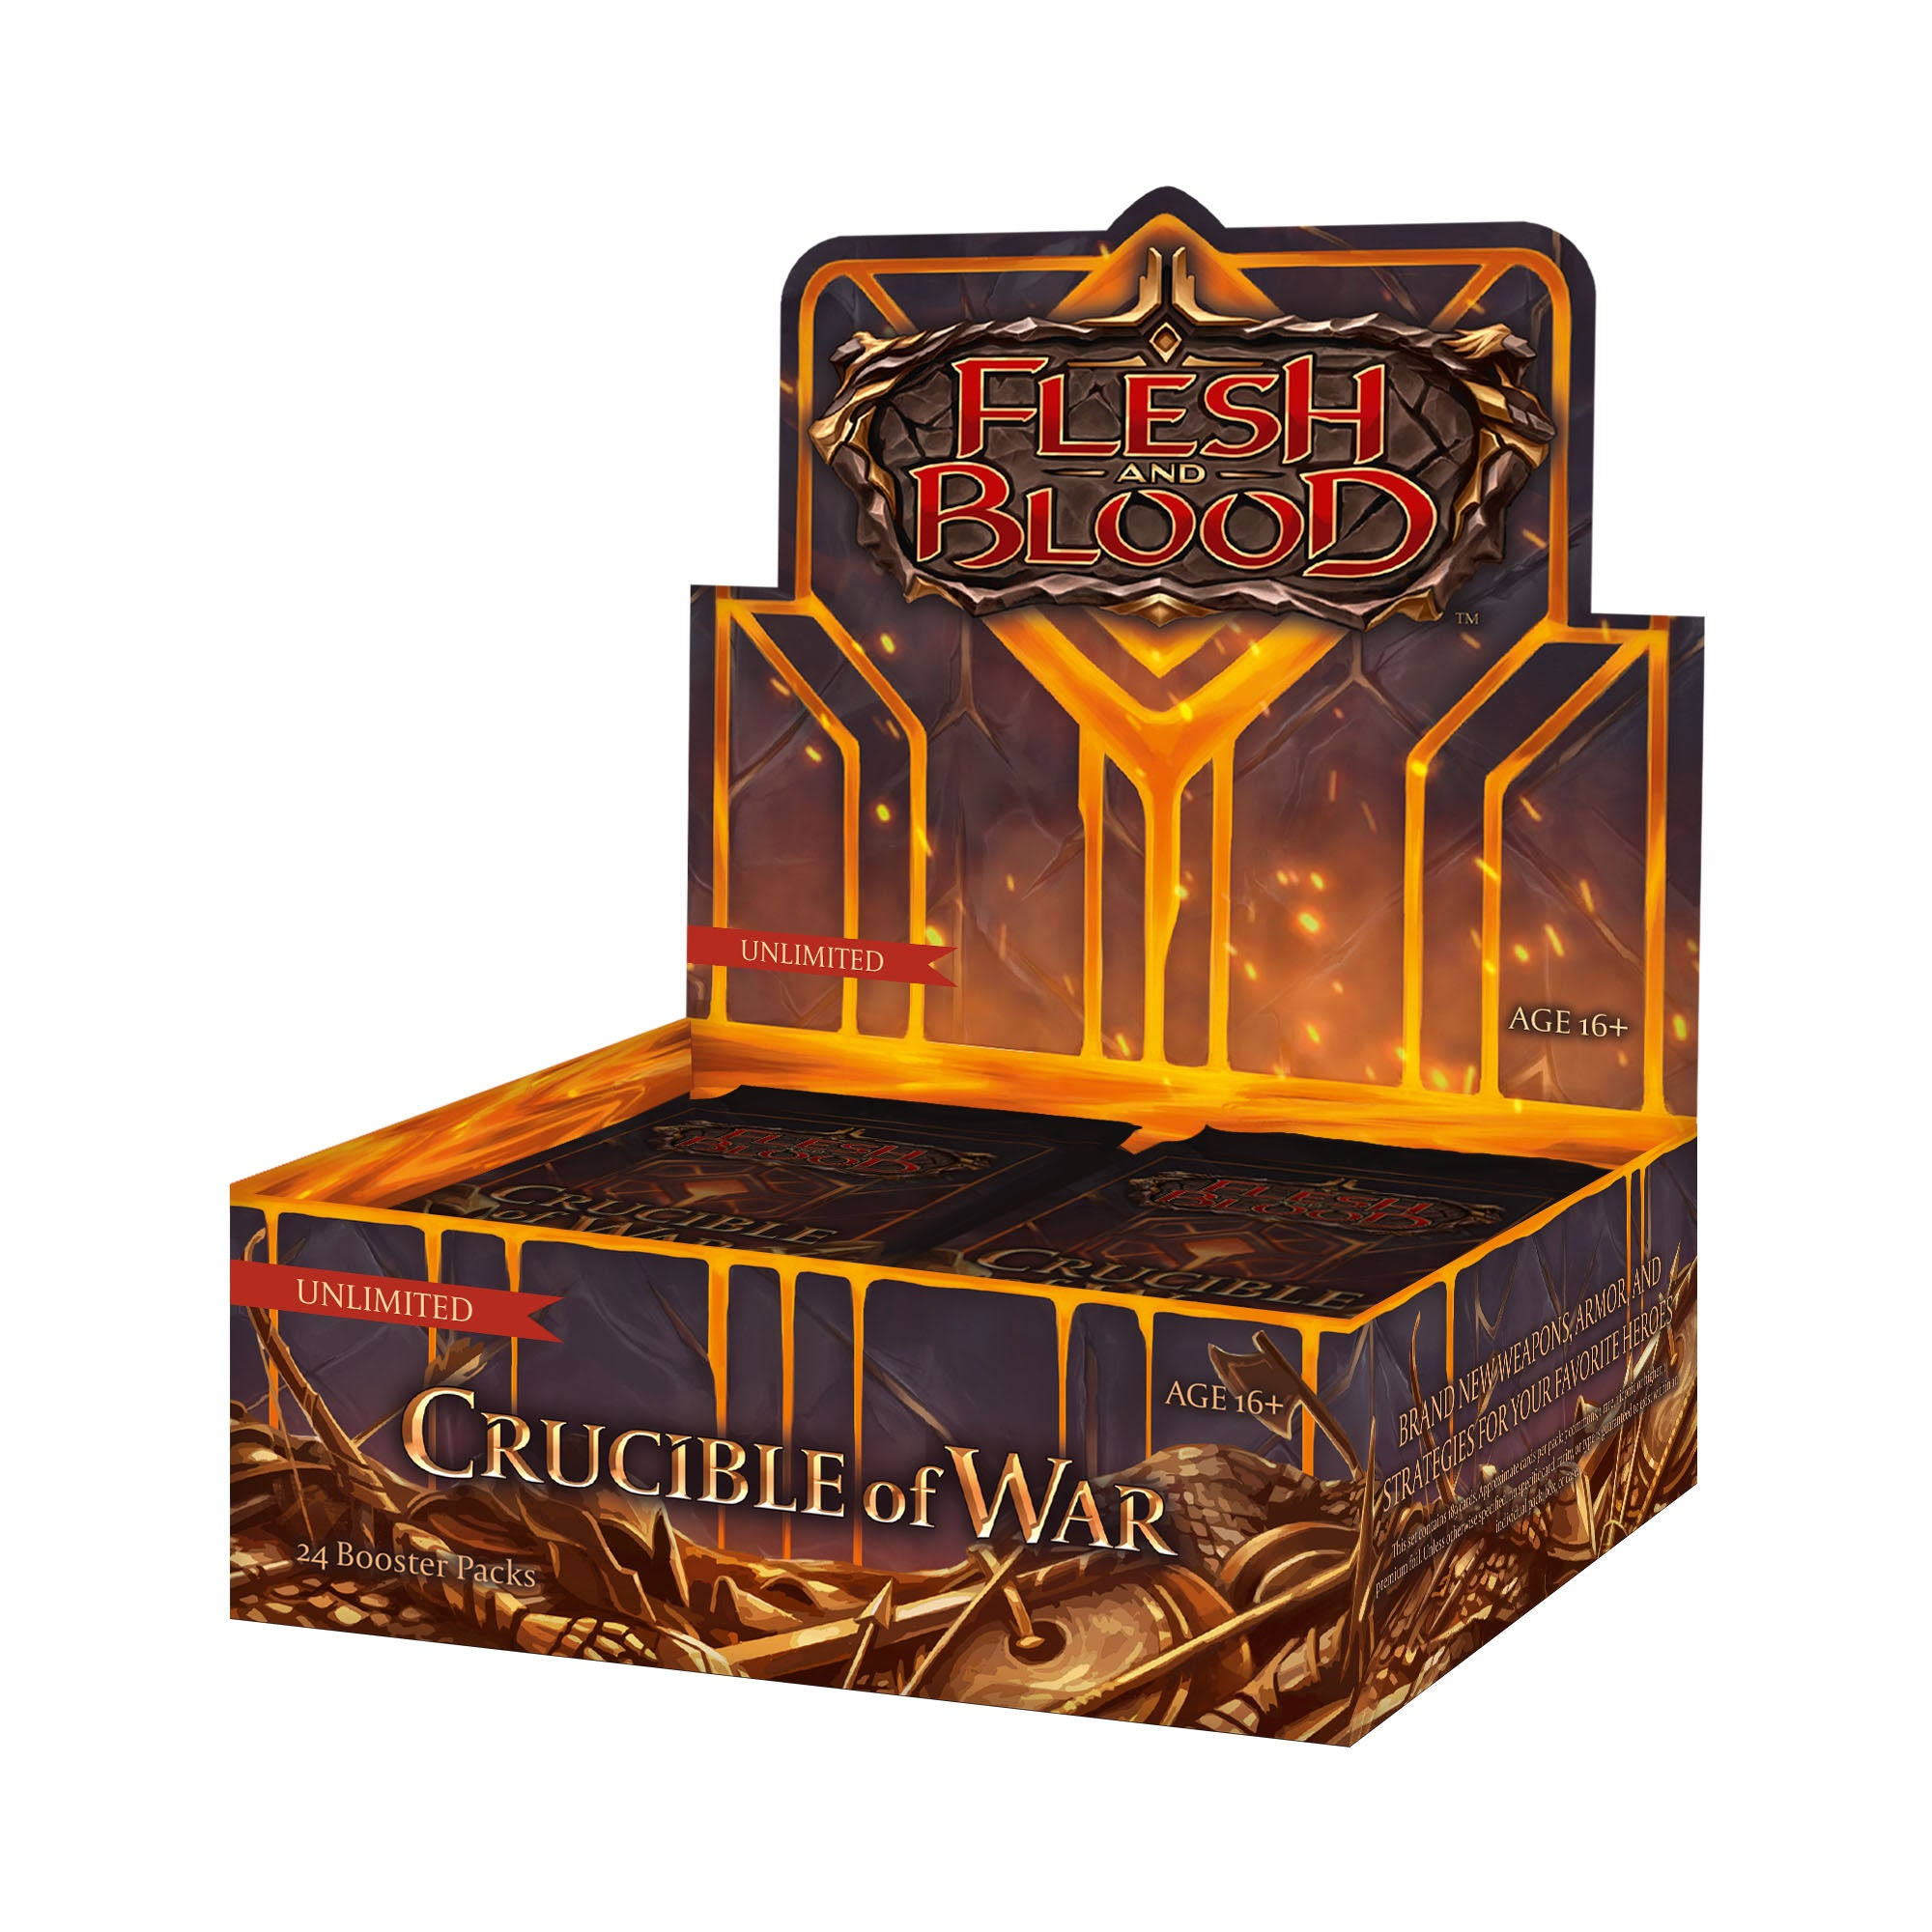 Flesh and Blood - Crucible of War Unlimited - Booster Box